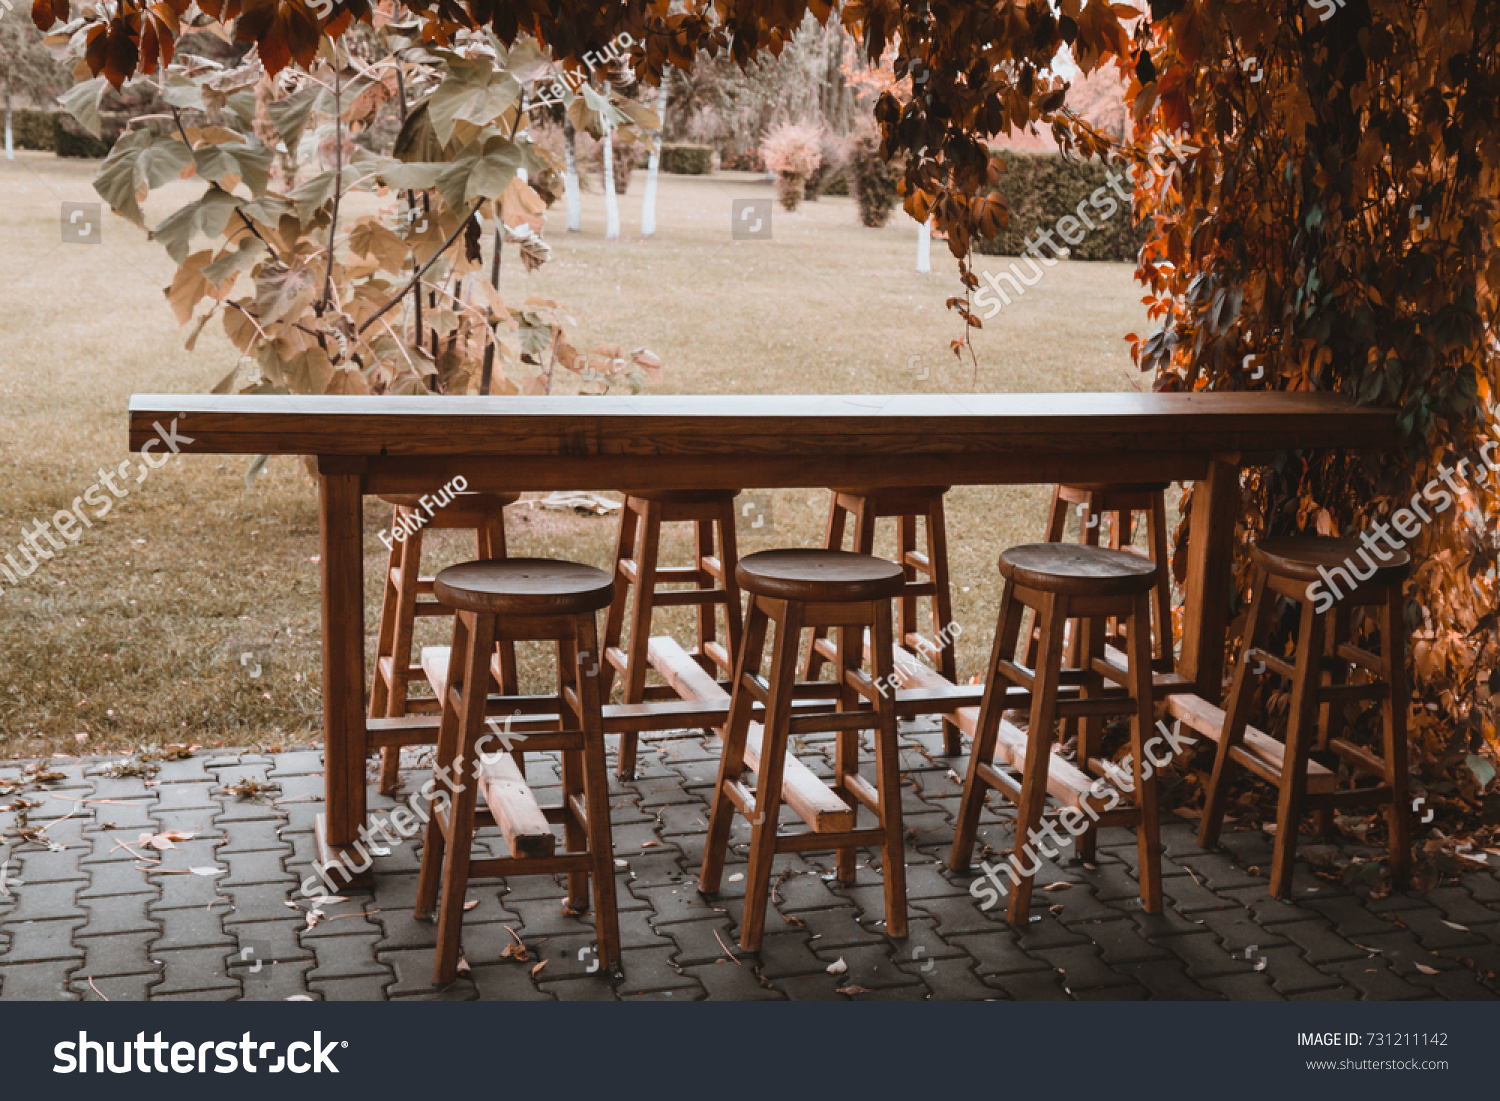 Wooden Bar Table Chairs Outside Autumn Stock Photo Edit Now 731211142